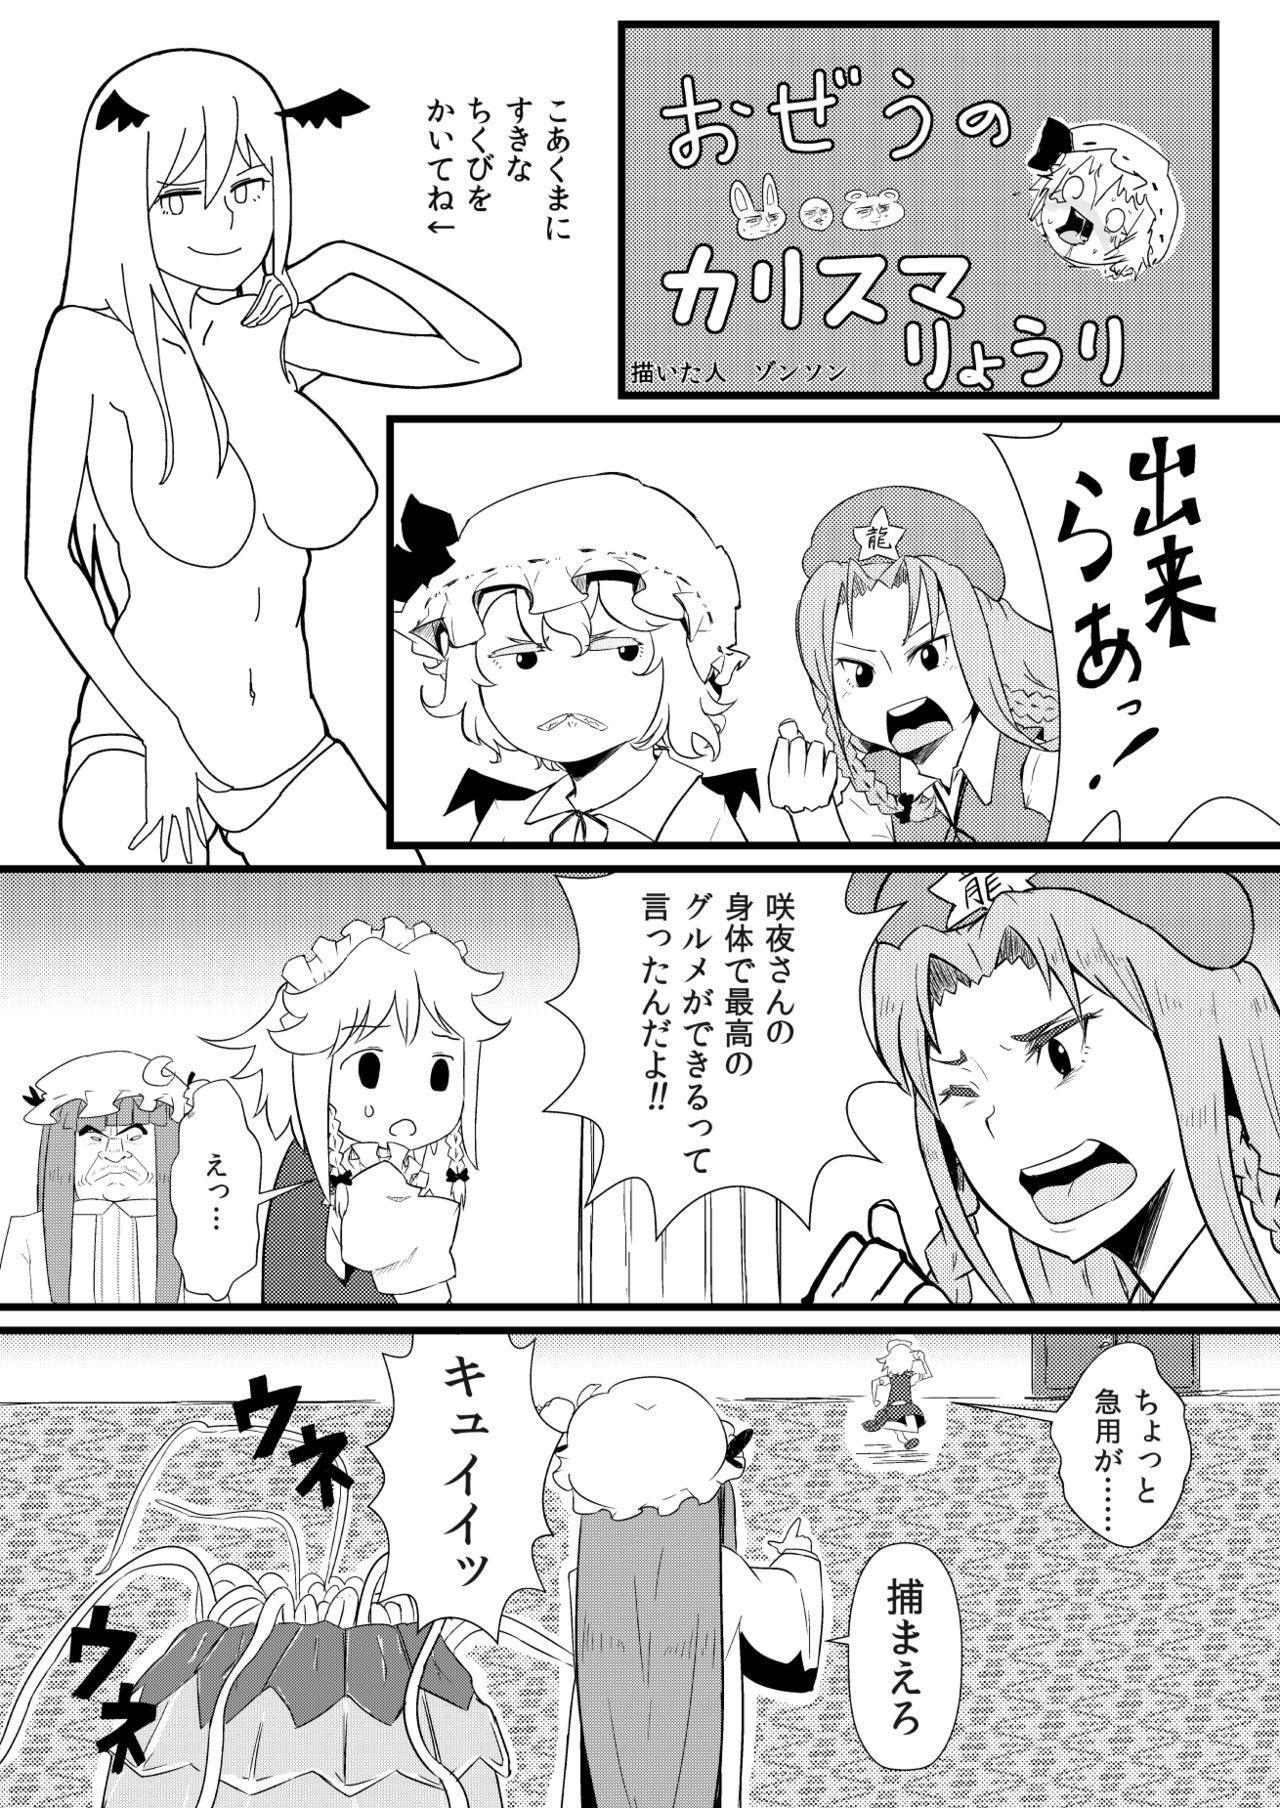 Perfect Tits 東方板としあき合同誌5 - Touhou project Real Amateur - Page 5